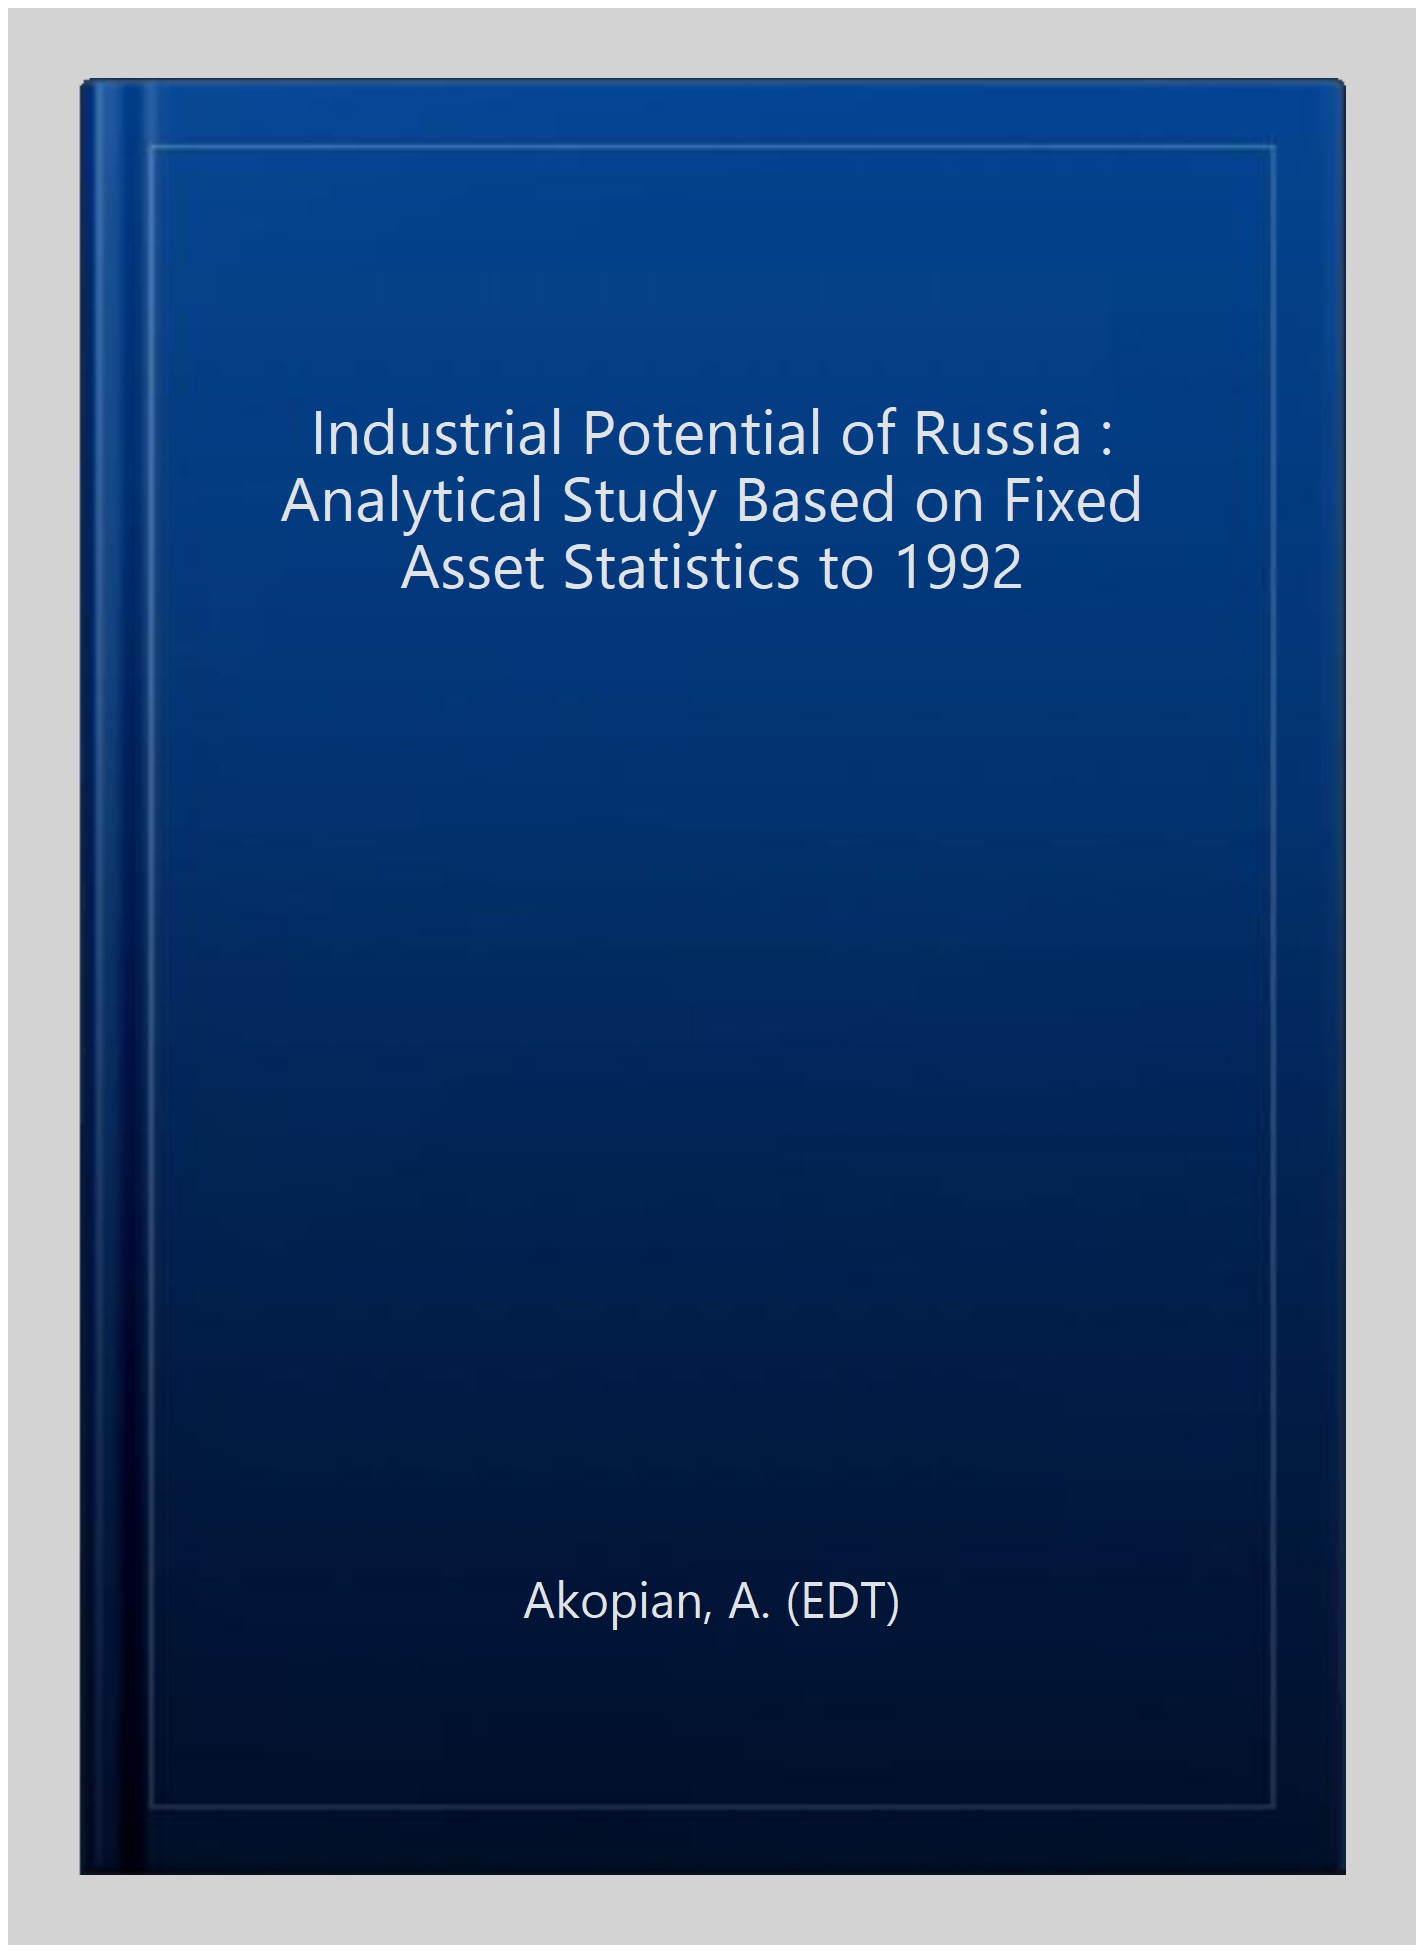 Industrial Potential of Russia : Analytical Study Based on Fixed Asset Statistics to 1992 - Akopian, A. (EDT)